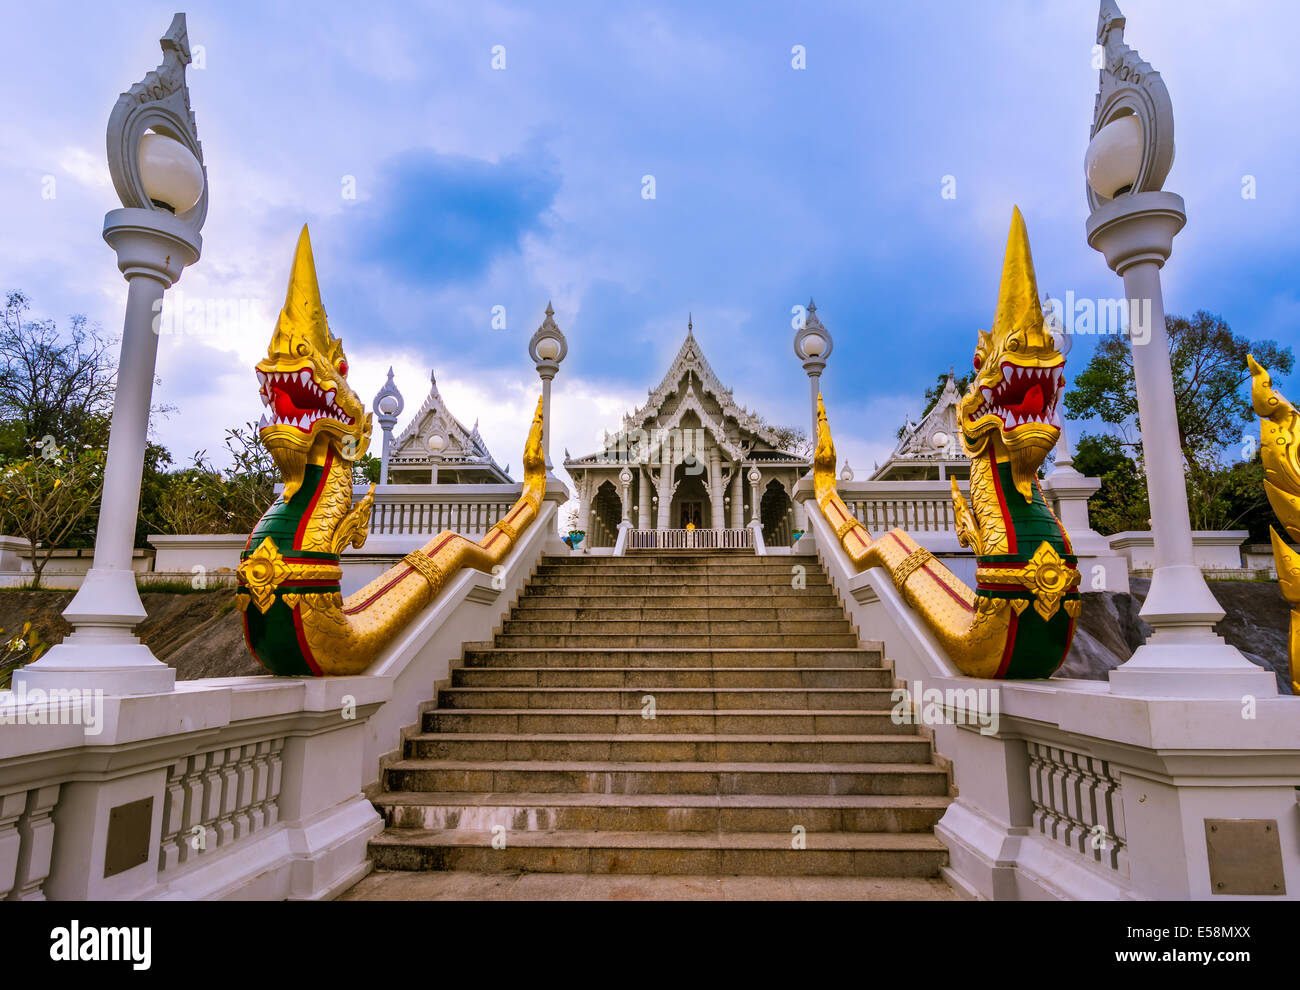 Wat Kaew temple in Krabi, Thailand. Wat Kaew: one of the main temples (to some it may look like a shiny white wedding cake) loca Stock Photo